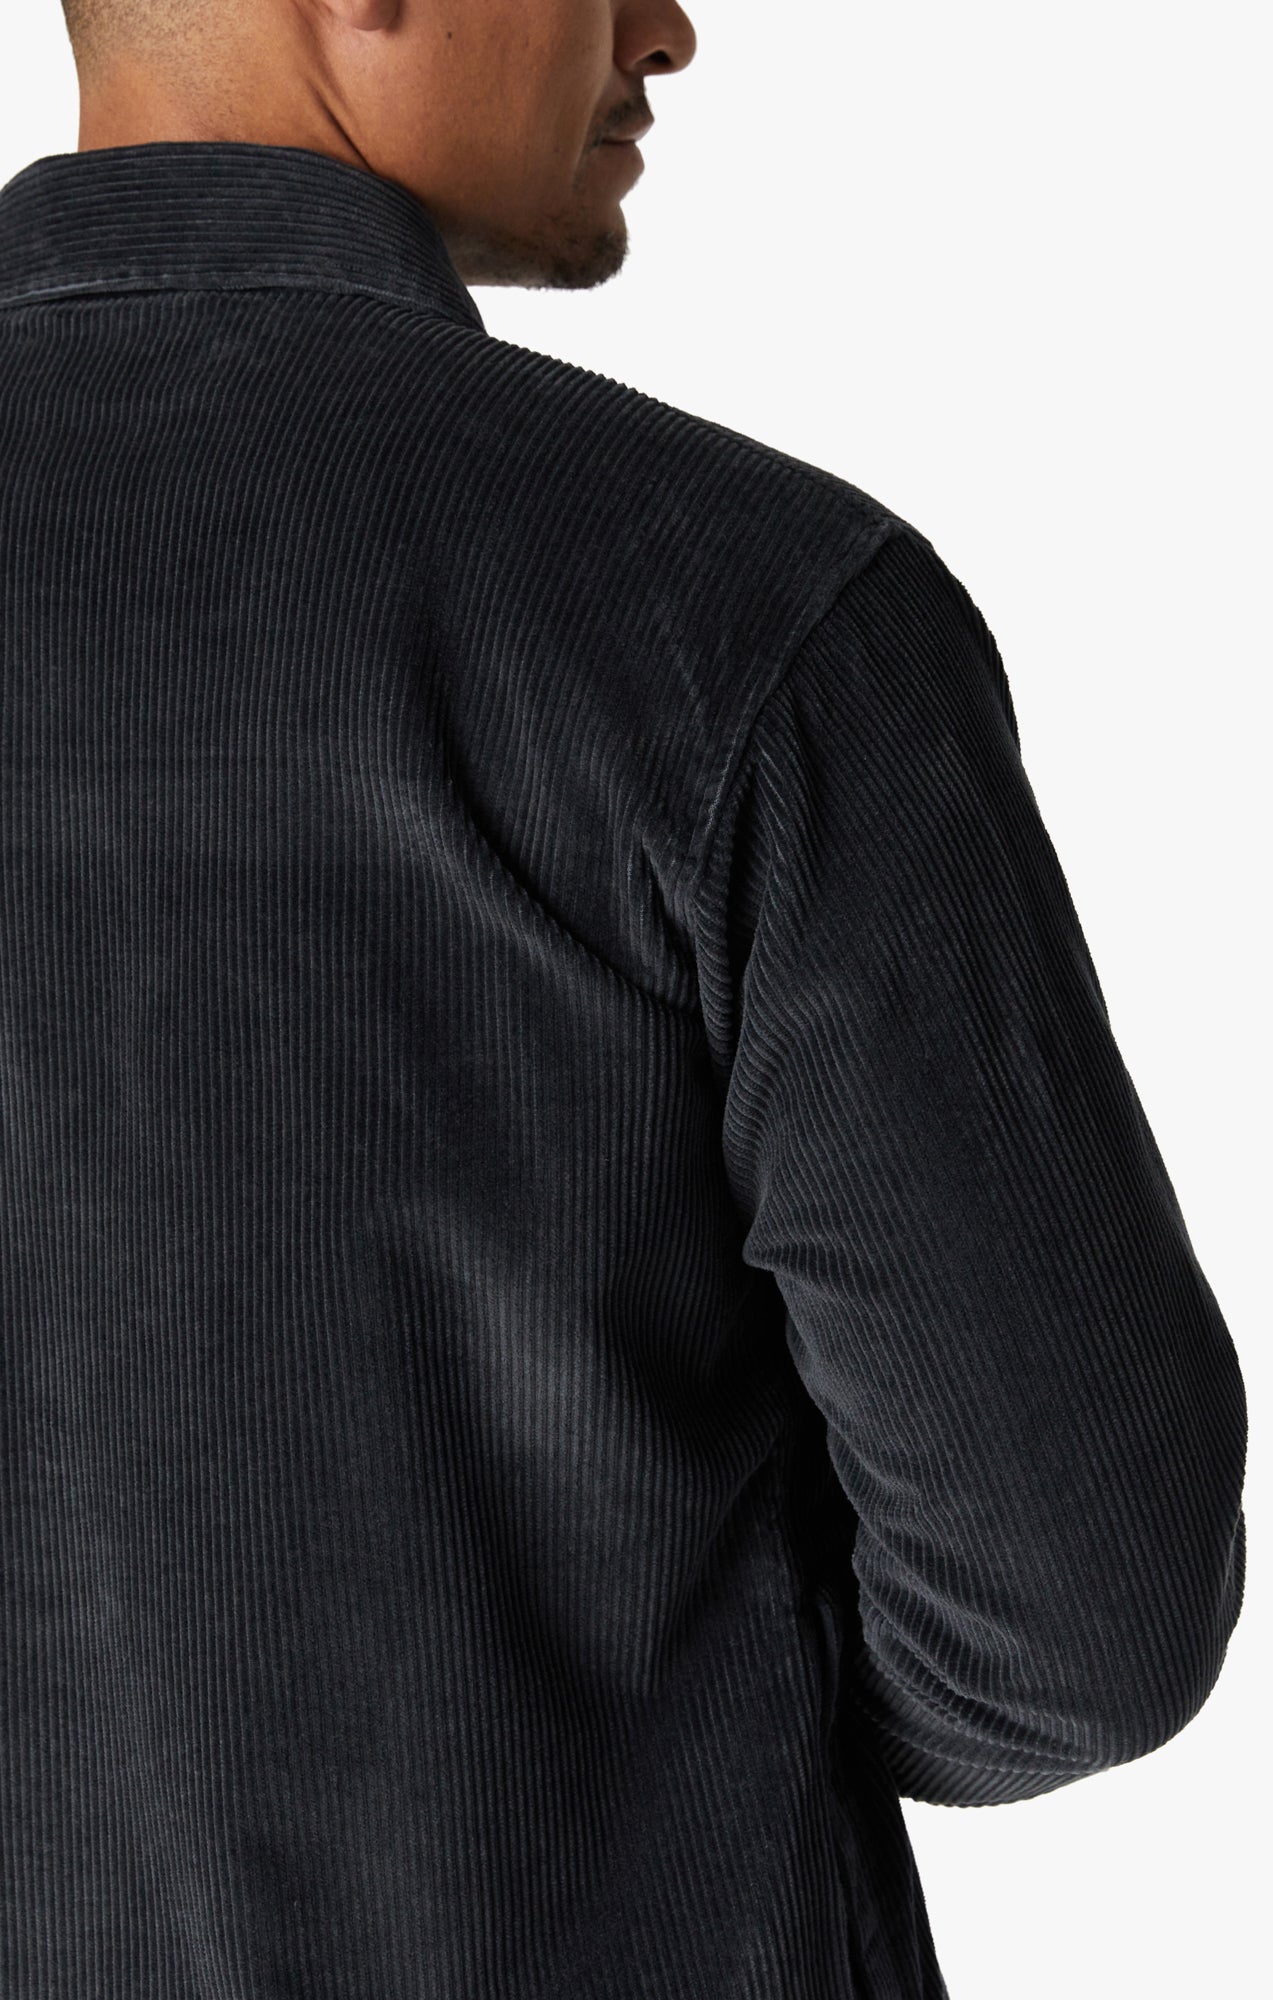 Overshirt In Charcoal Image 6